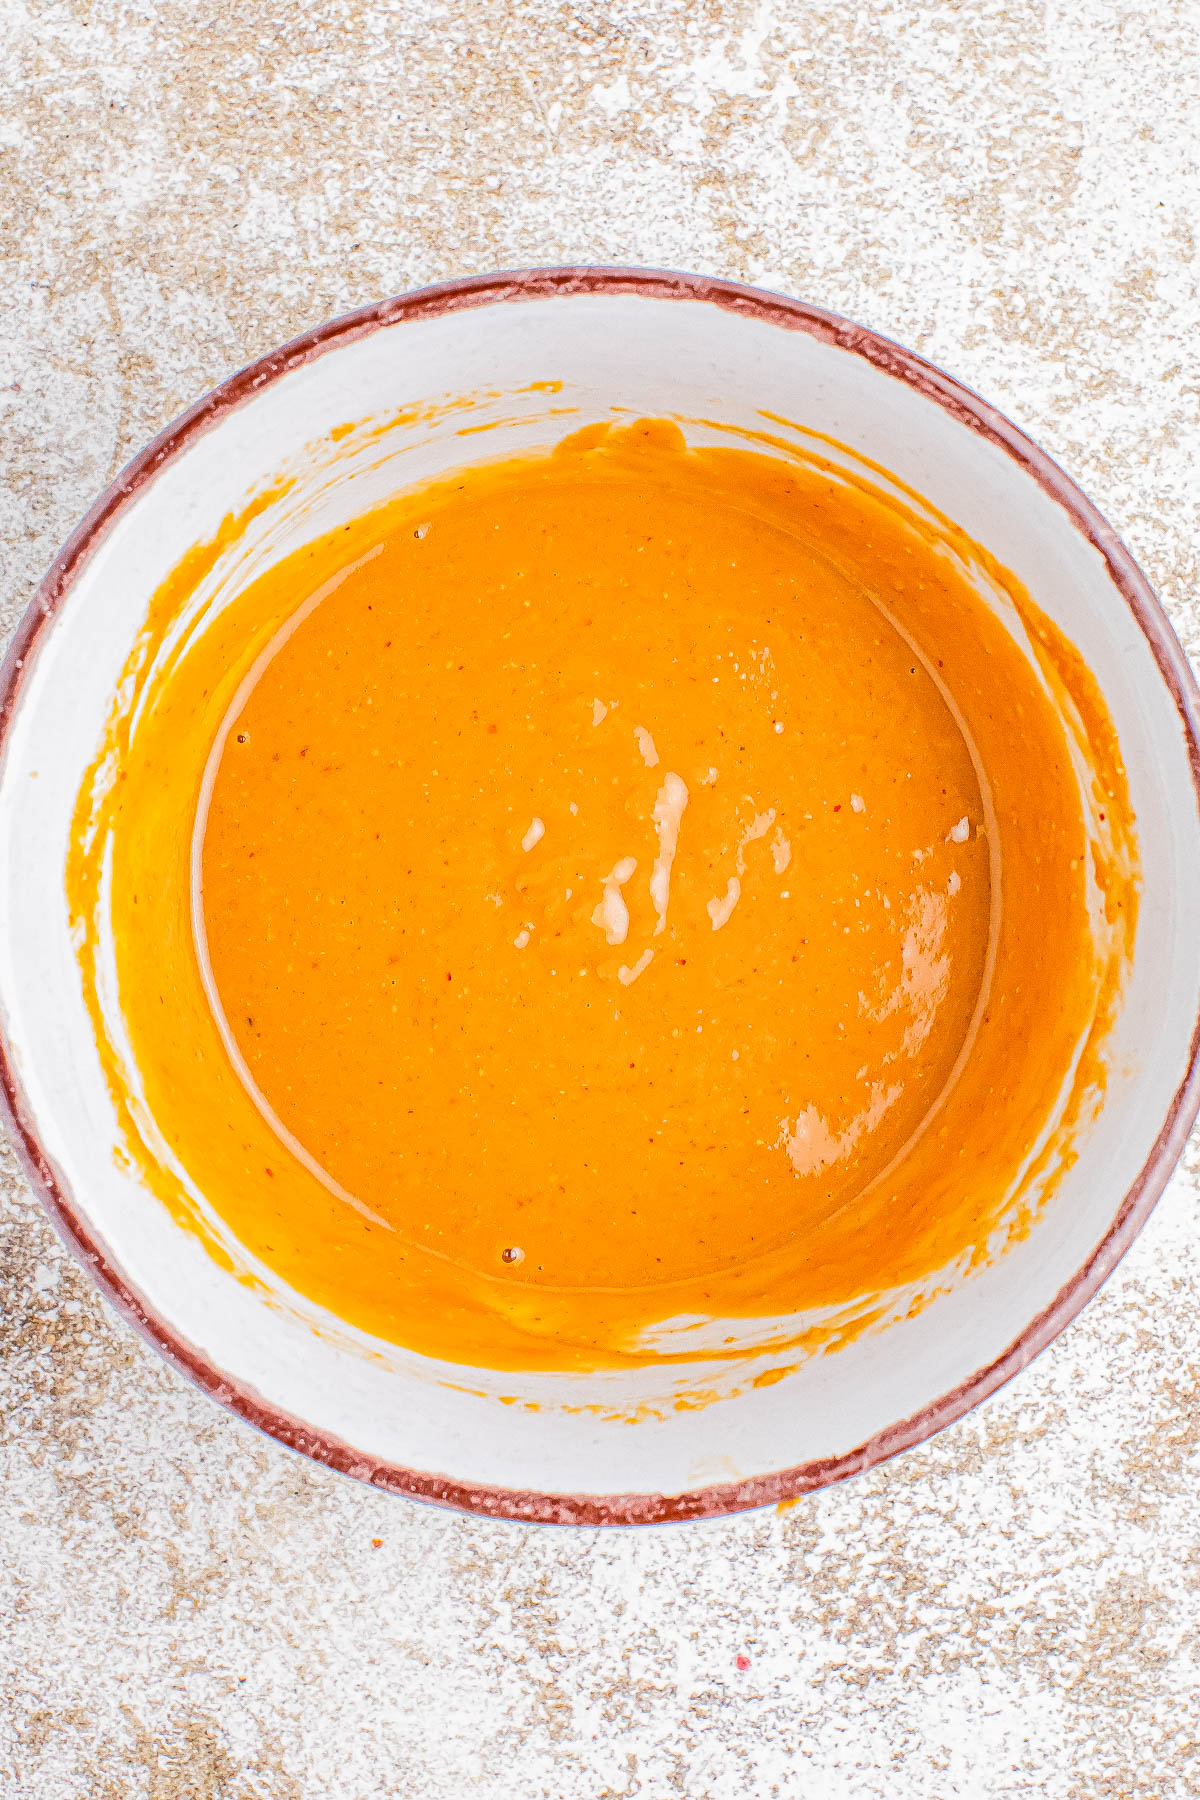 A bowl filled with a smooth, orange batter on a lightly floured surface.